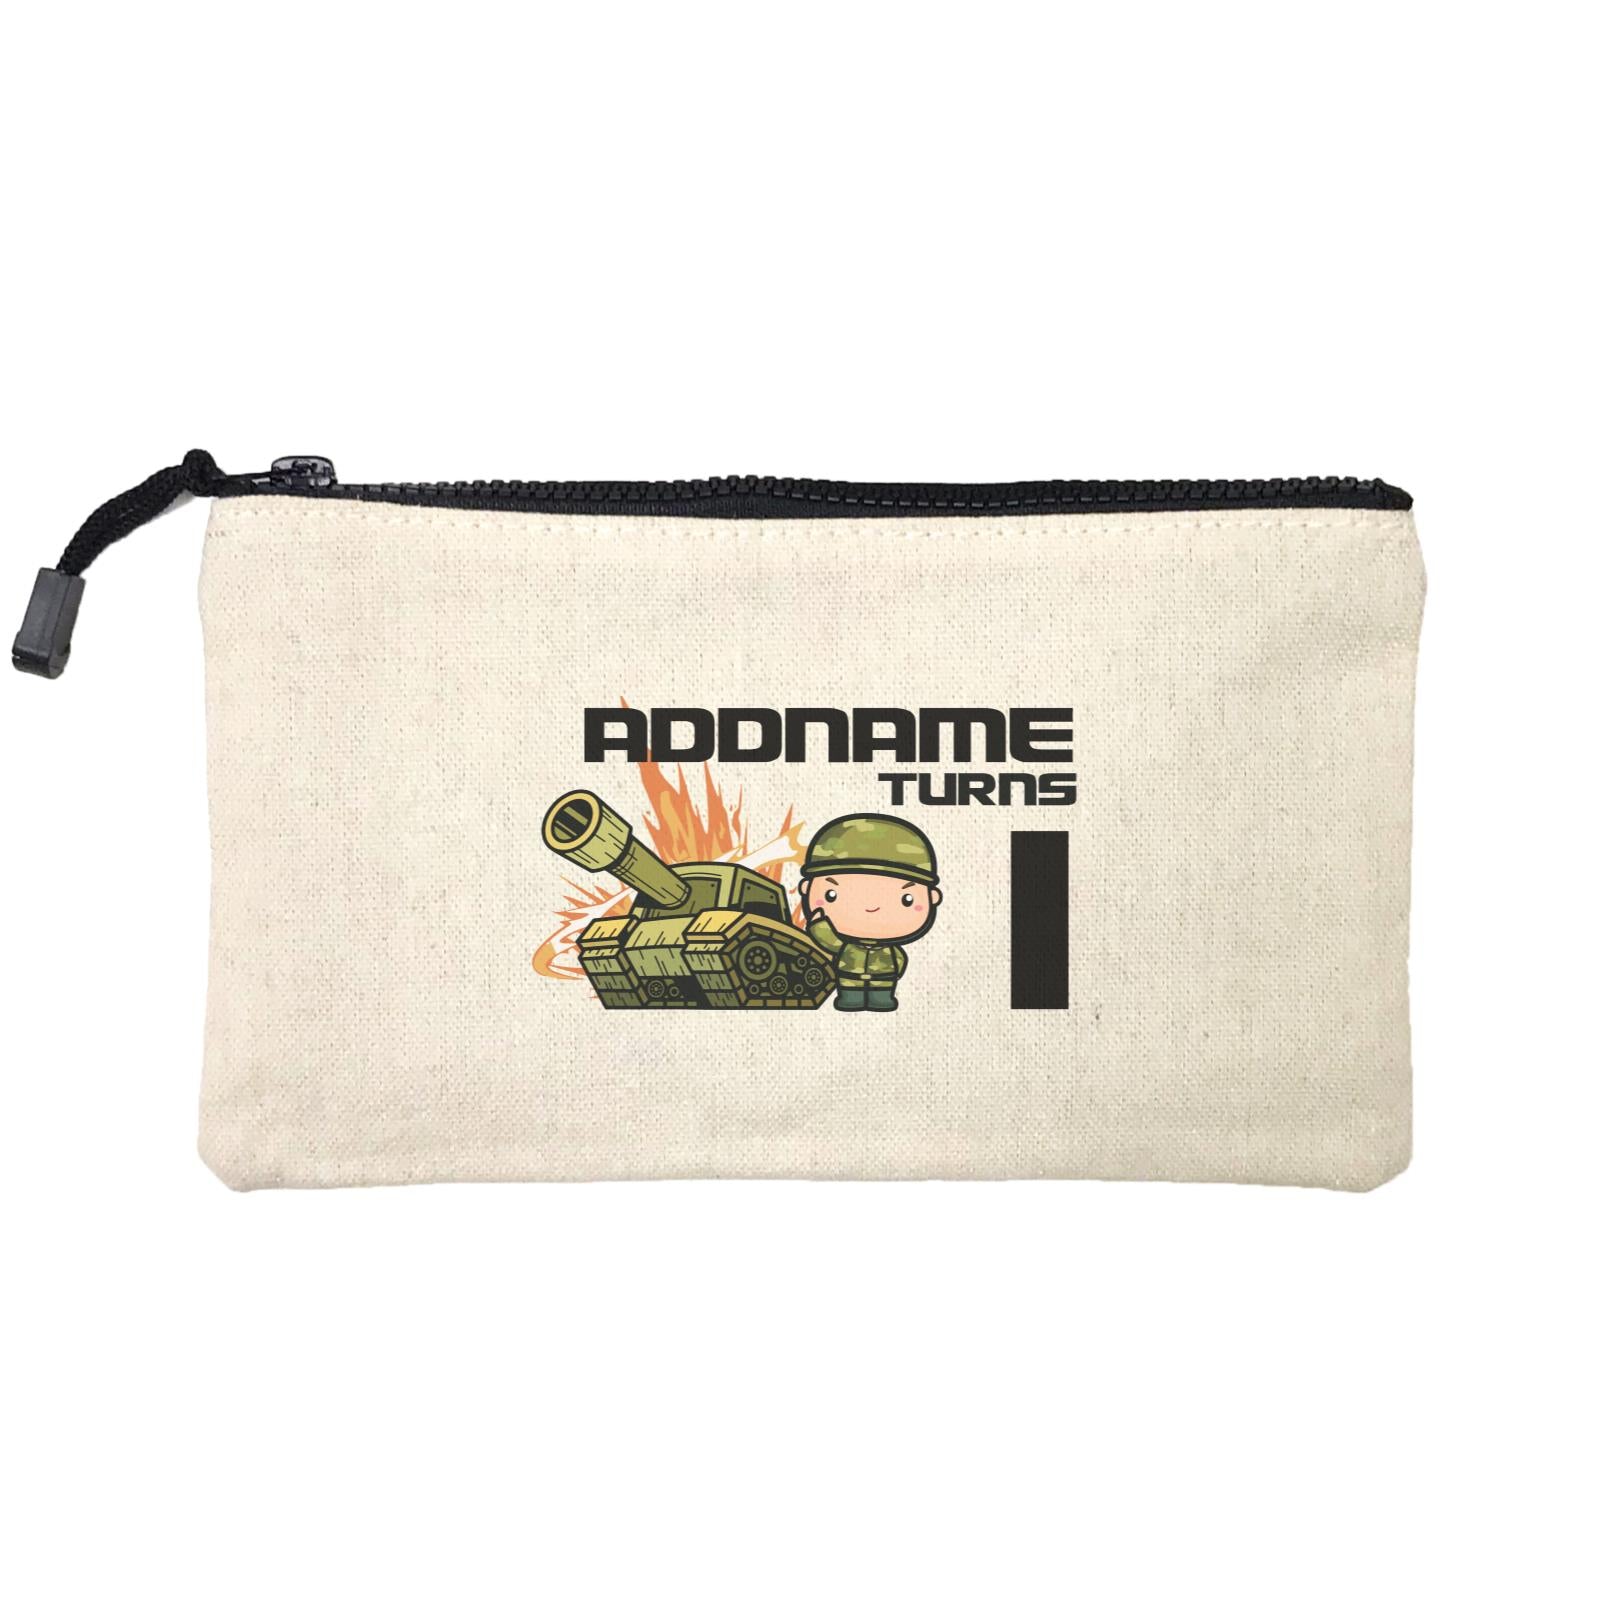 Birthday Battle Theme Tank And Army Soldier Boy Addname Turns 1  Mini Accessories Stationery Pouch